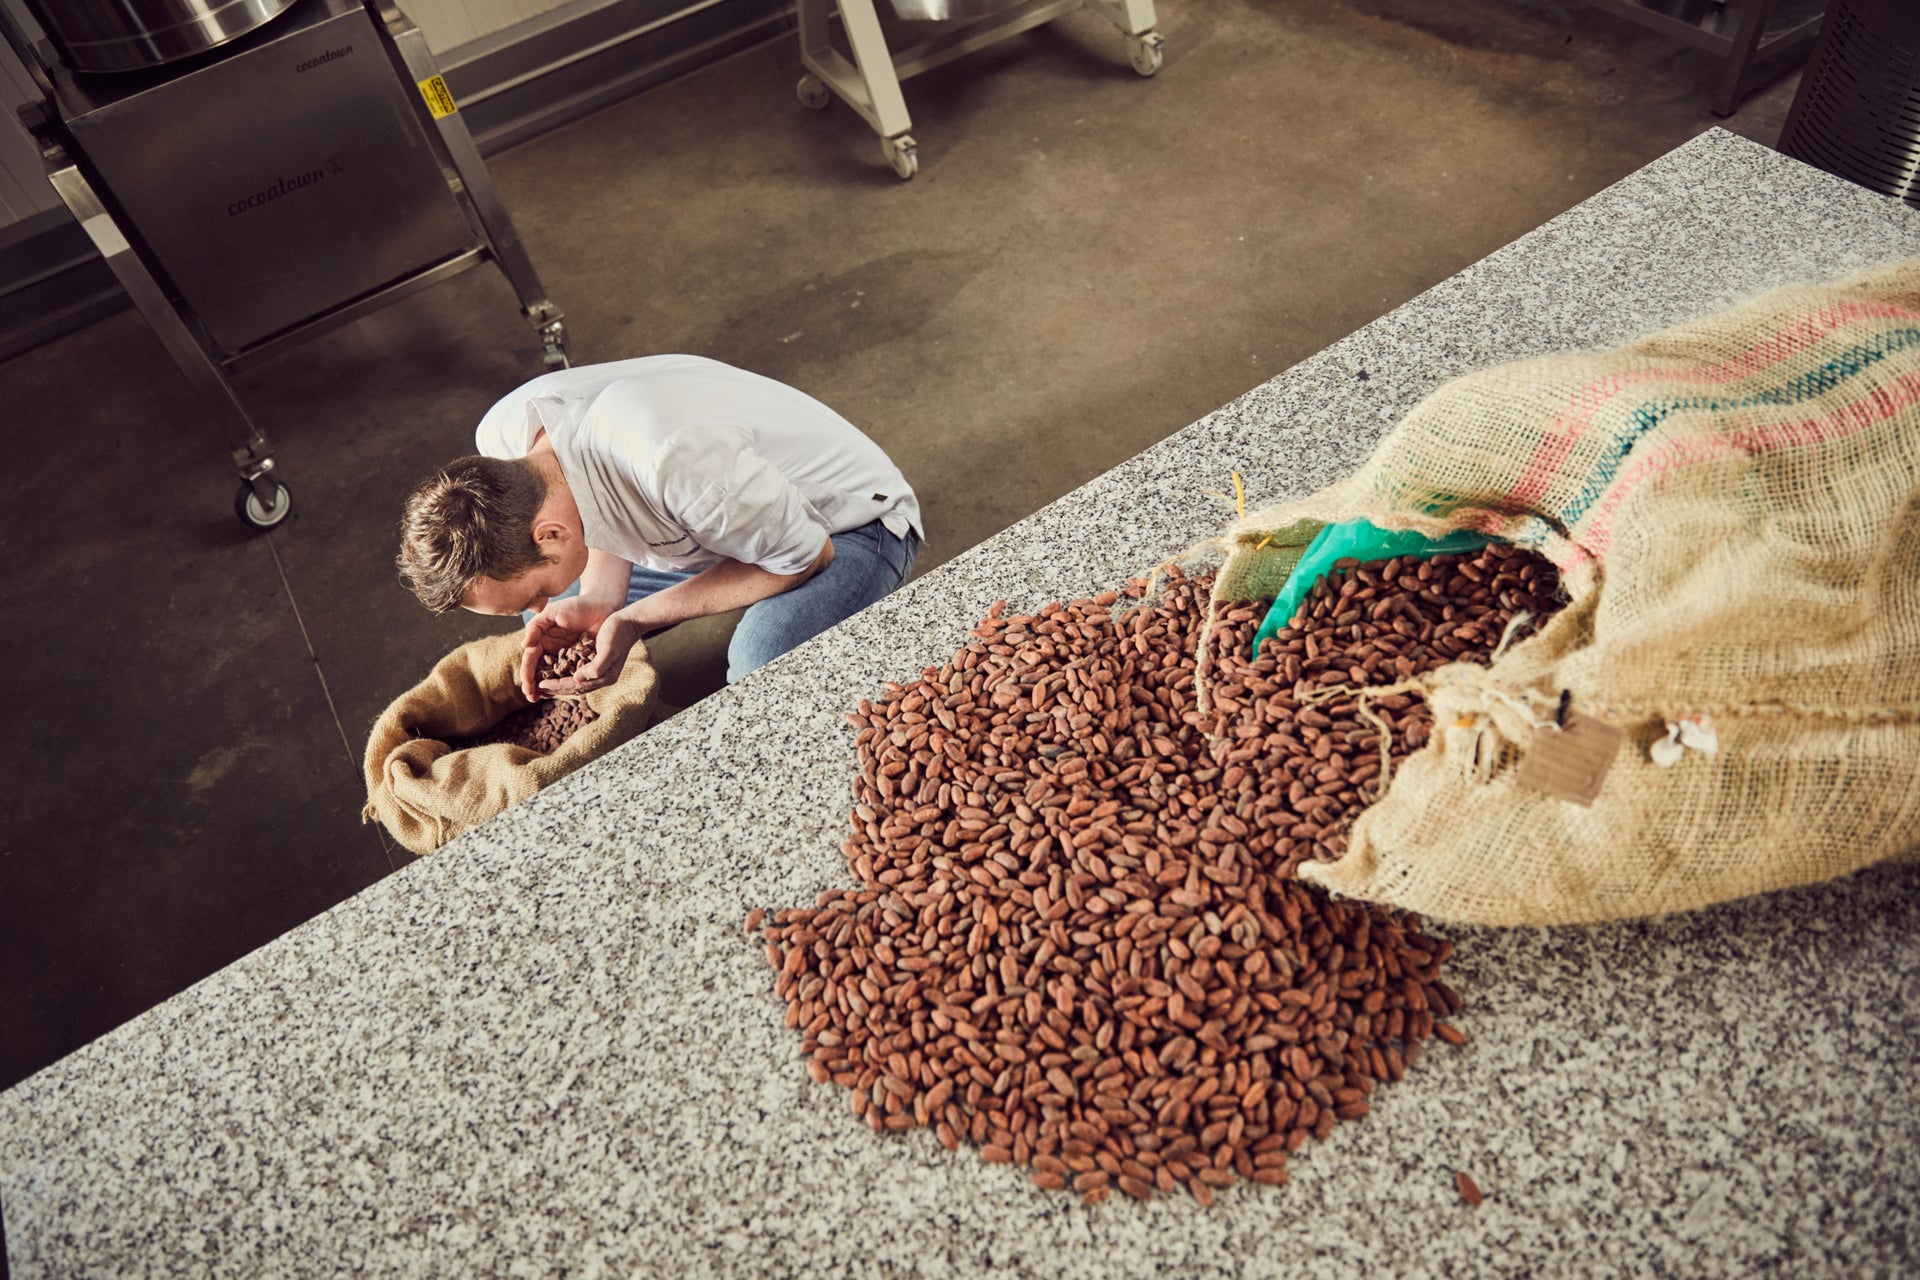 Mark Sorting His New Bean to Bar Cacao Delivery